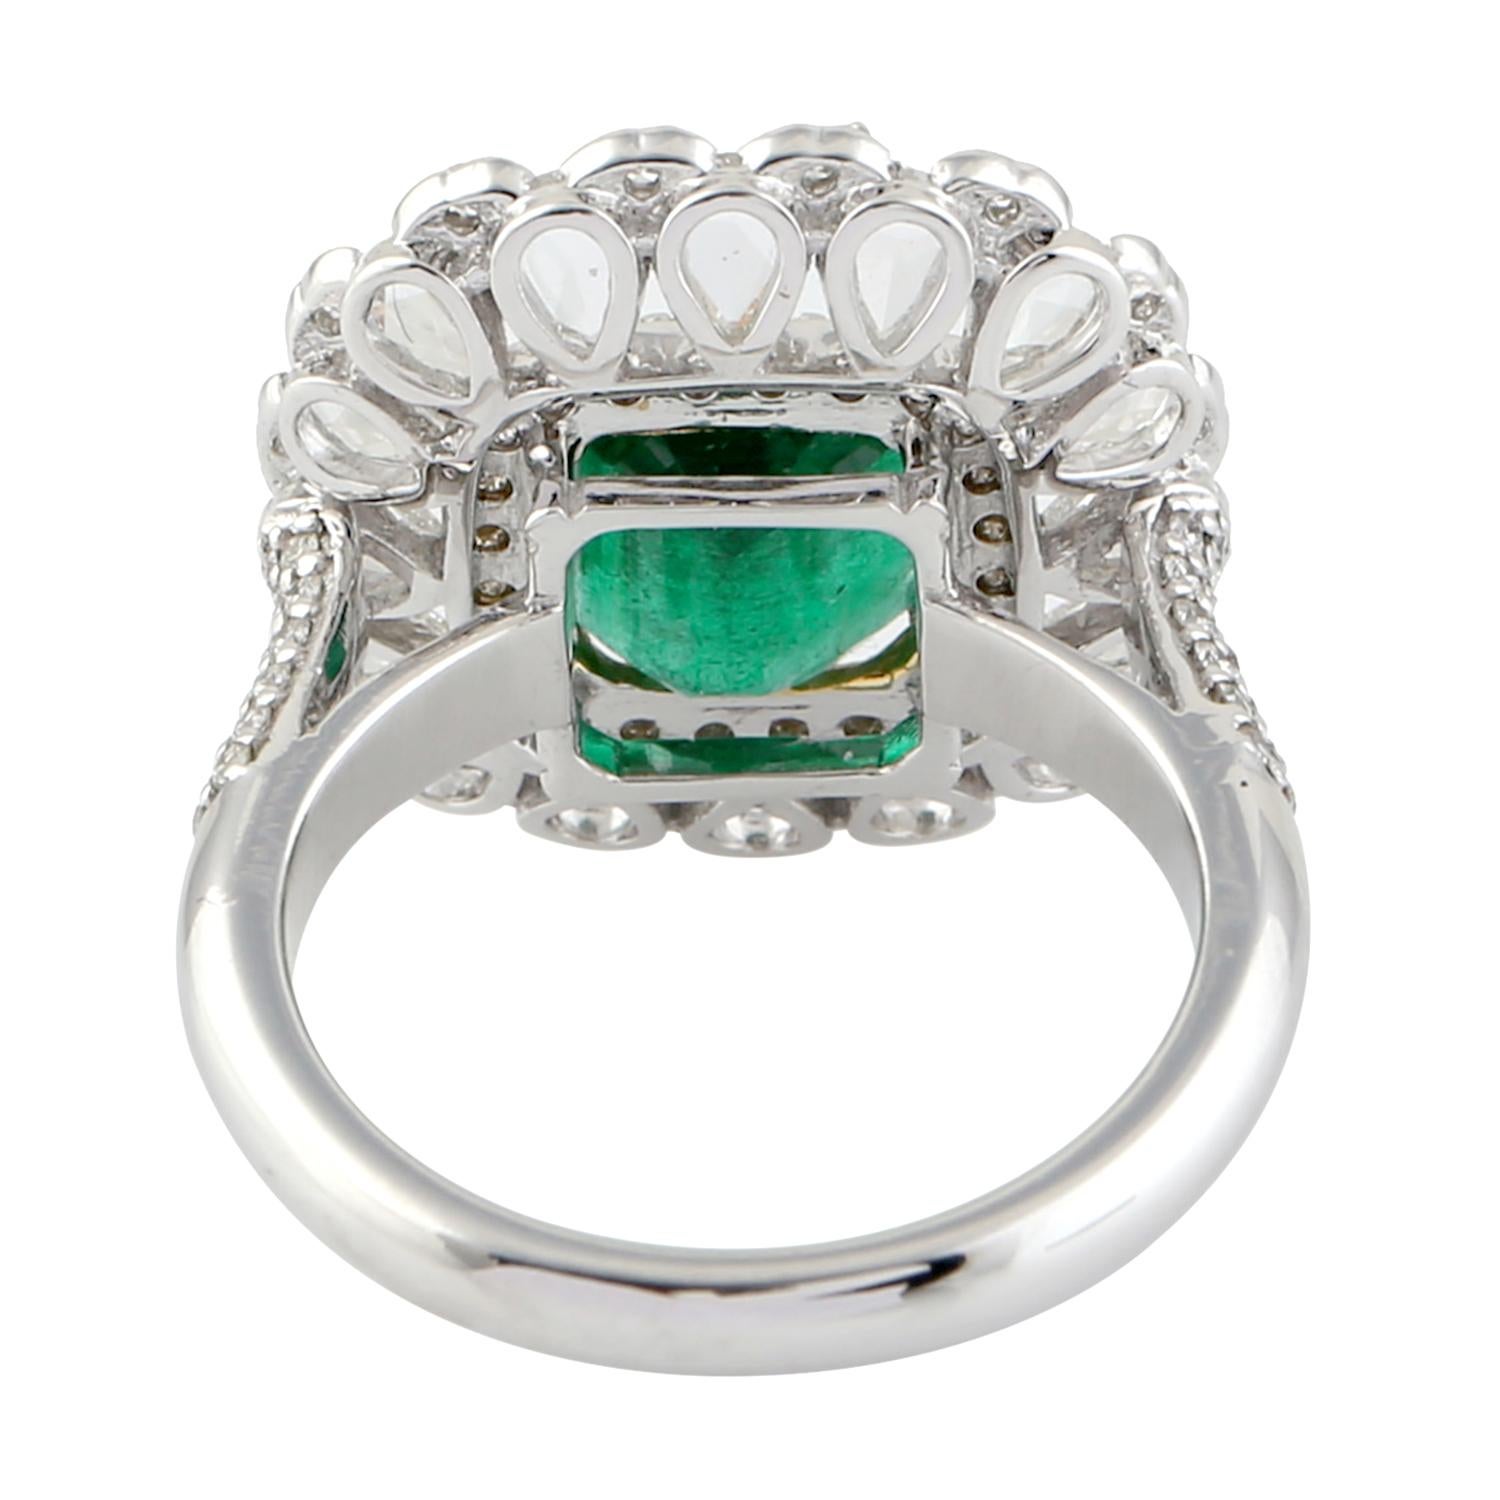 Princess cut Emerald Ring with pear shape rose cut diamonds around in 18K White Gold is pure luxury.

Ring Size 7

18t White Gold 7.432gms
Diamond 1.89cts
Natural Zambian Emerald 2.5cts